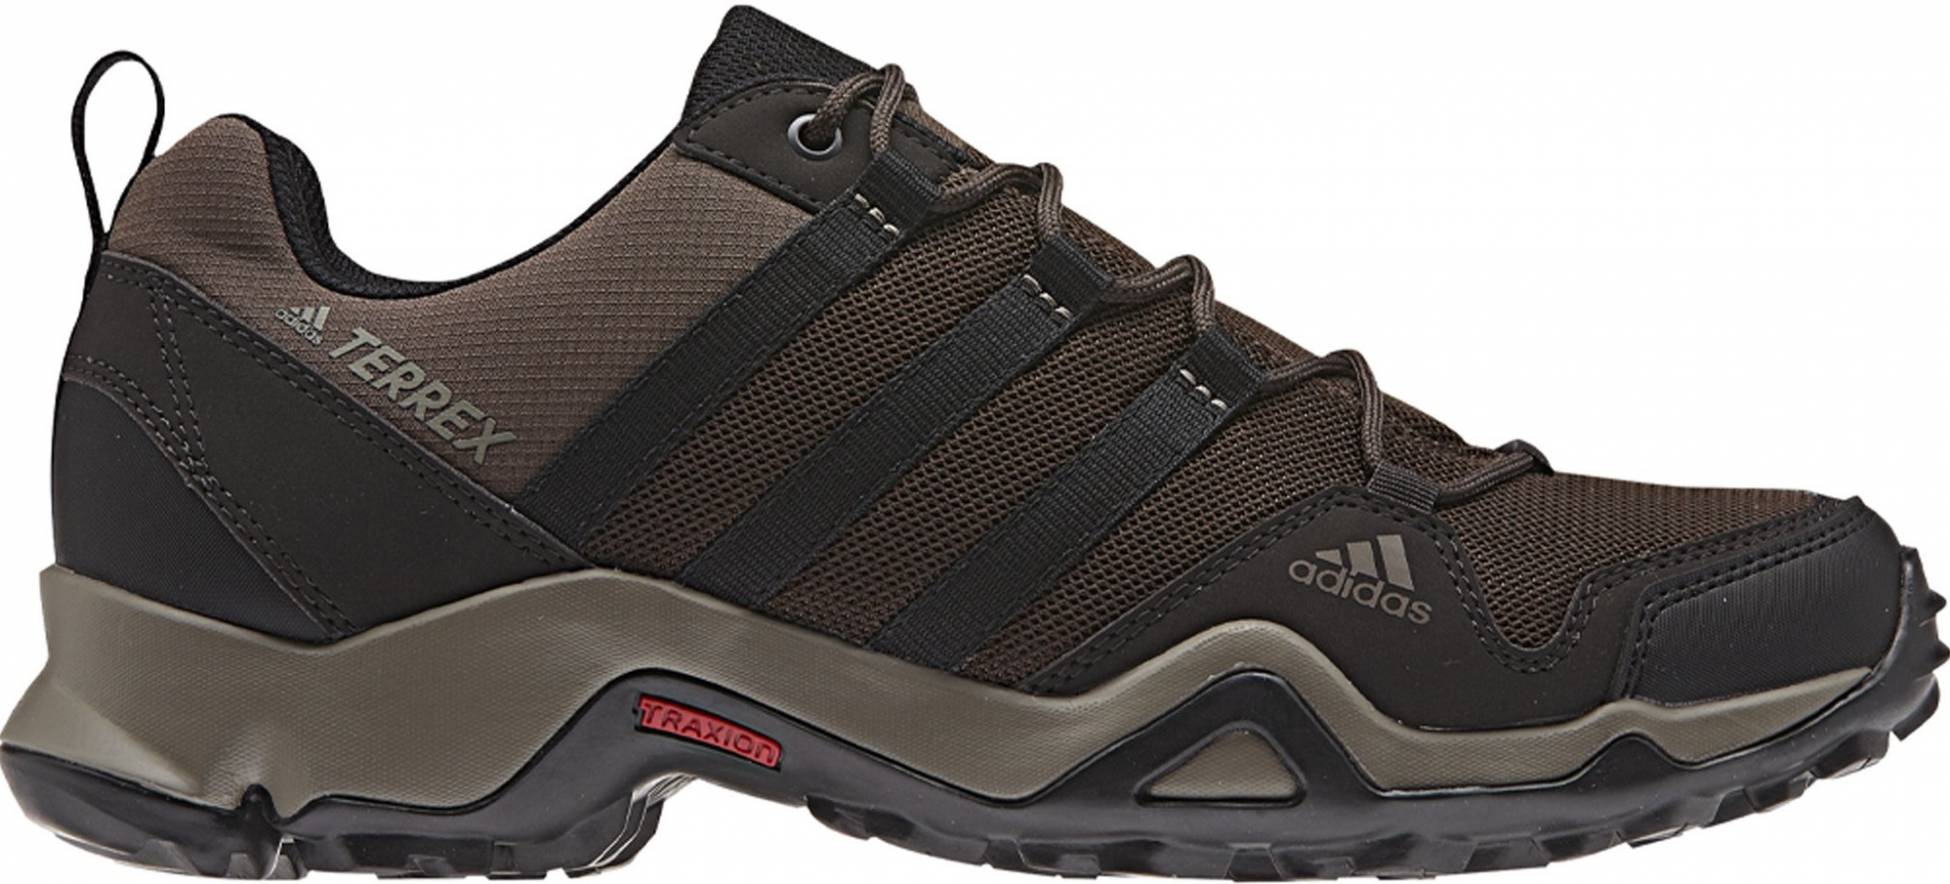 Only $65 + Review of Adidas Terrex AX2R | RunRepeat